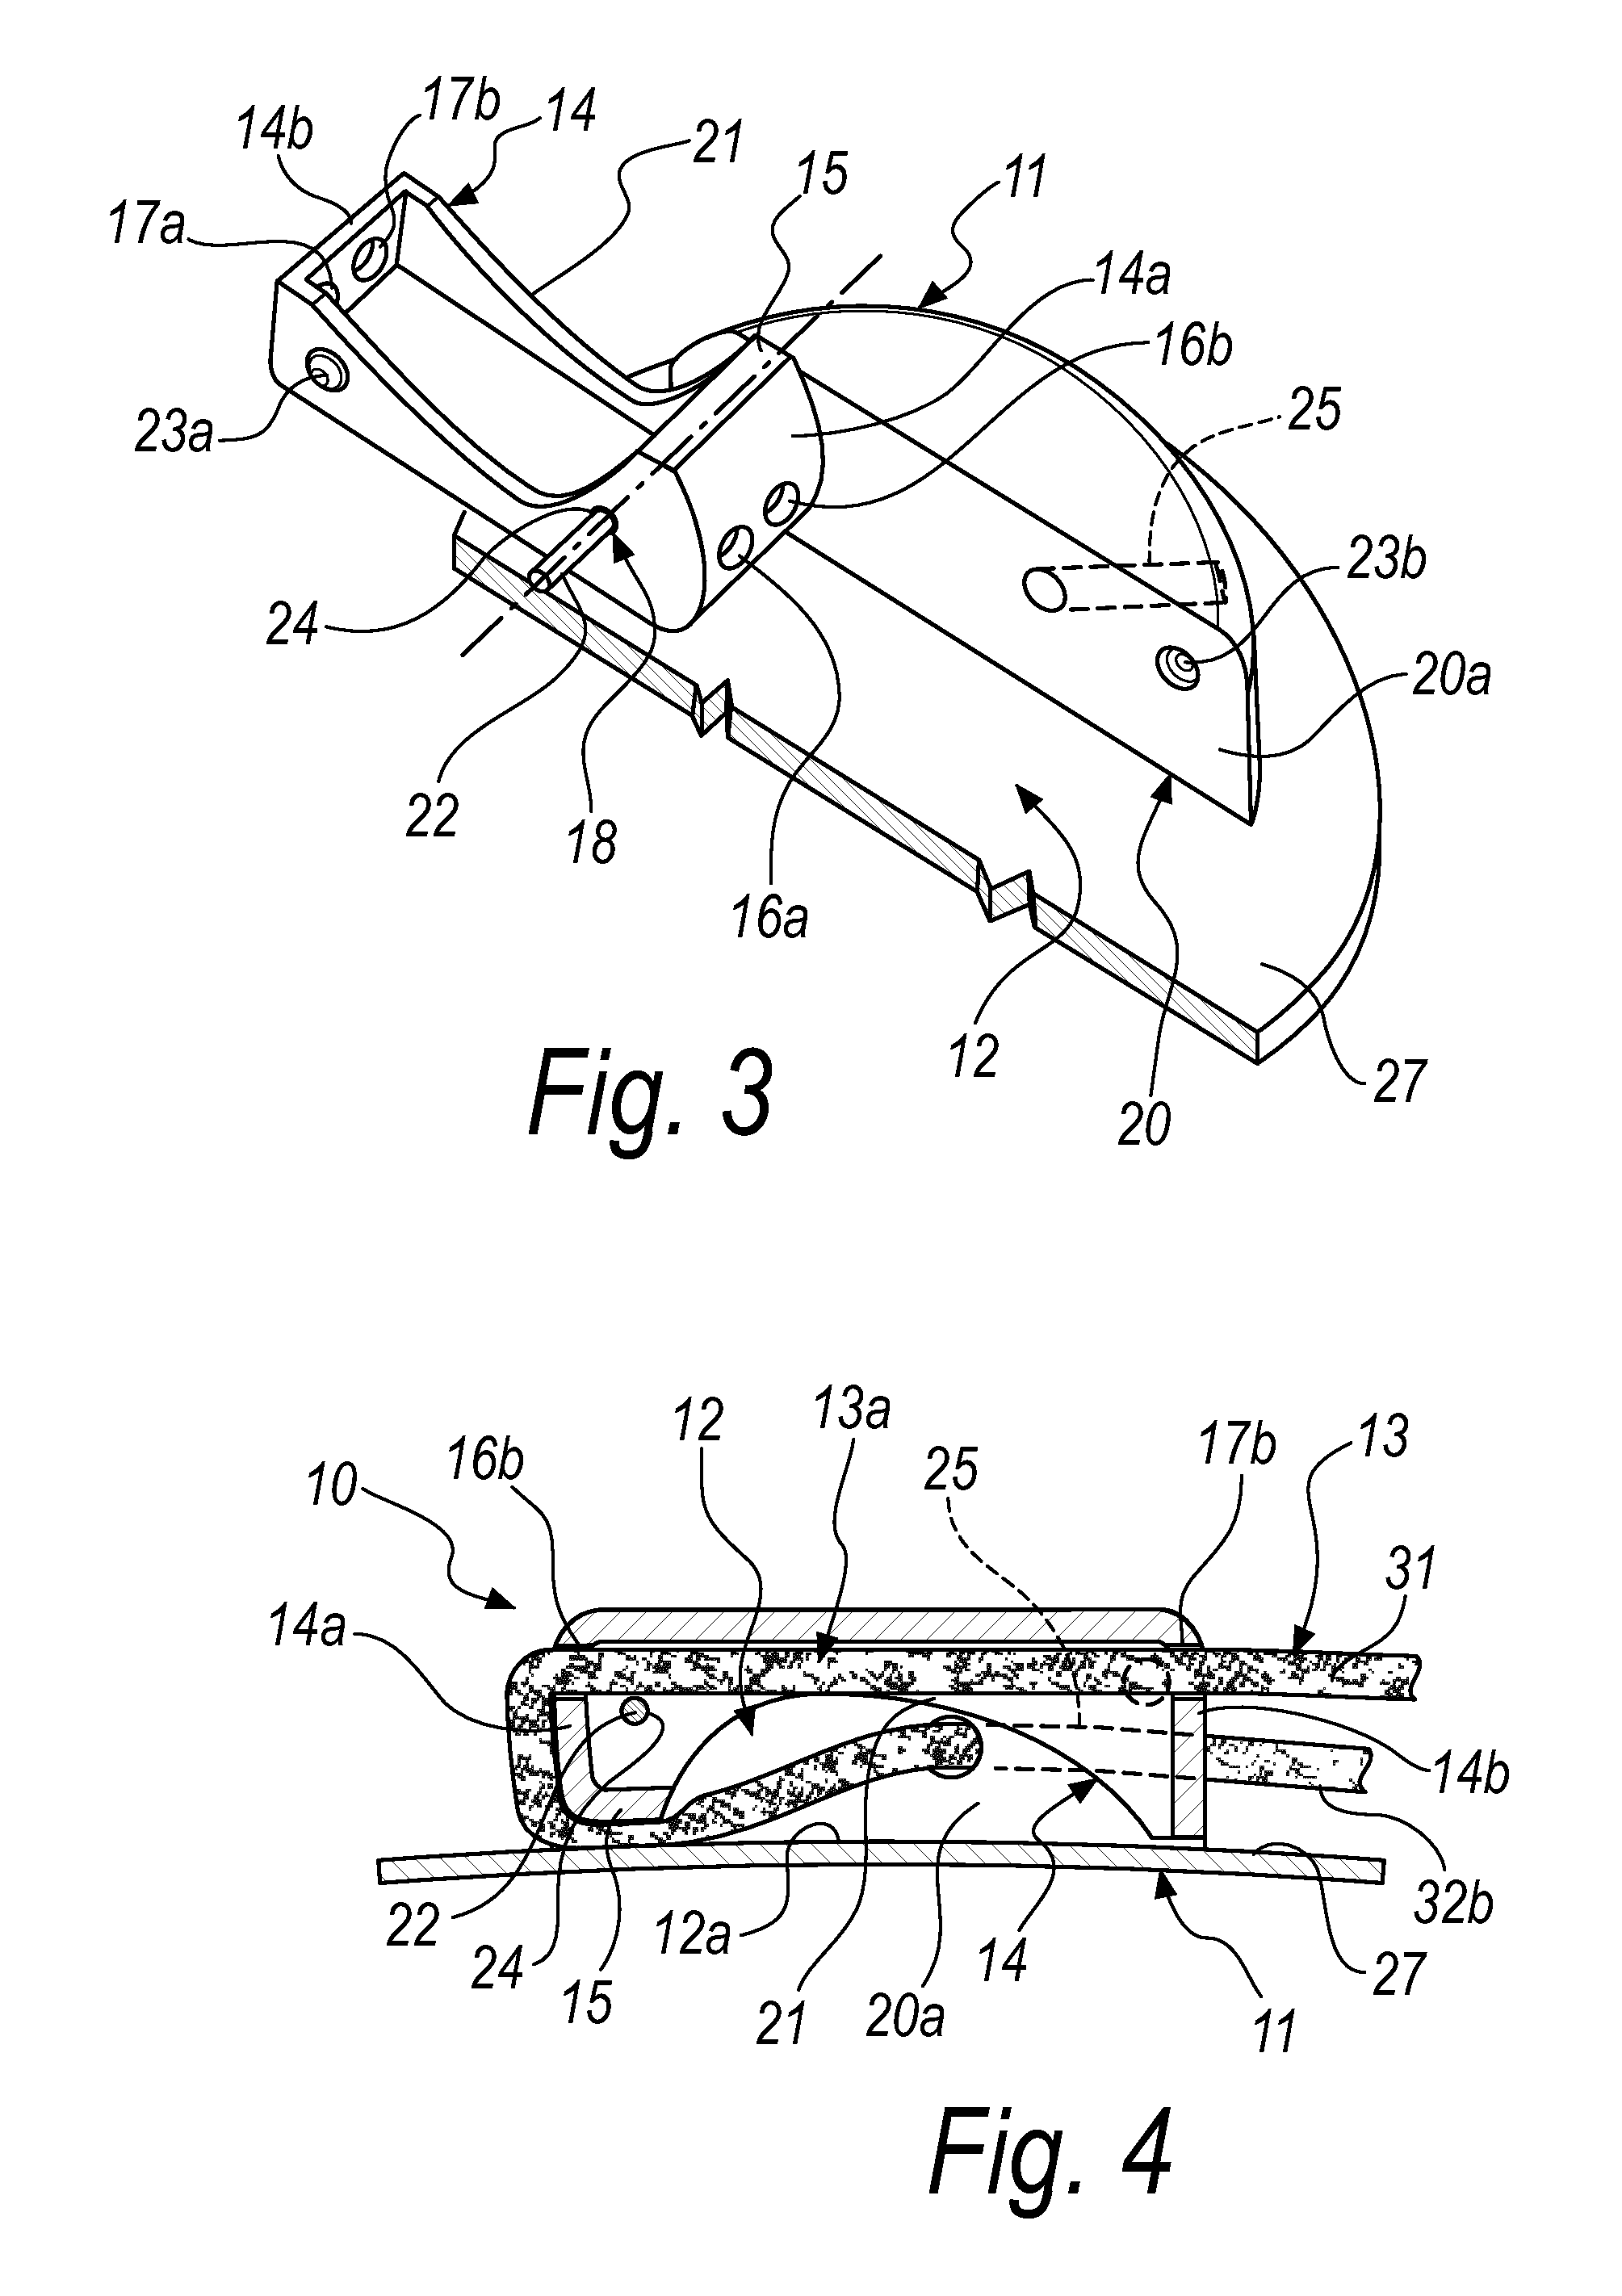 Locking device for laces, shoelaces, cords and the like, particularly adapted to close shoes, rucksacks, items of clothing and the like